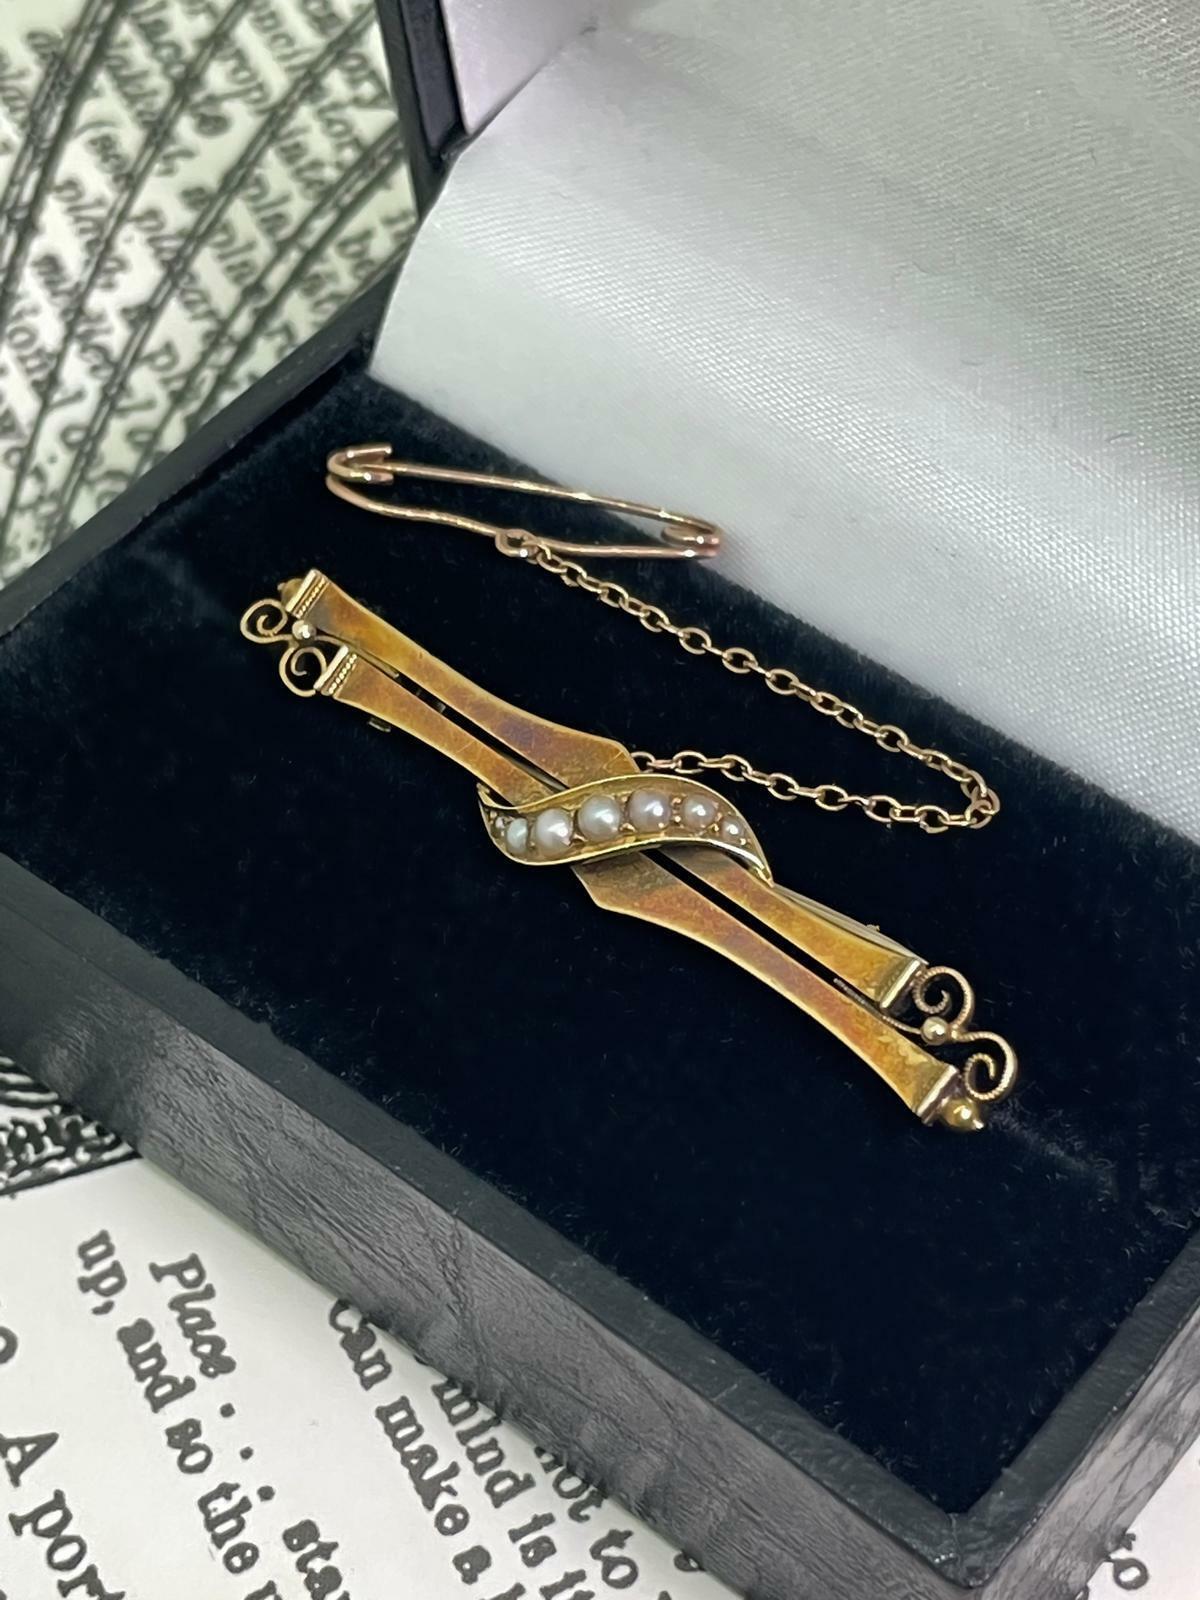 Beautifully crafted in 15K Yellow Gold,
this stunning Bar Brooch 
is Edwardian, i.e. dating from the turn of XX century 

Of elegant elongated design, 
it features 2 horizontal bars with lovely details & 
delicate millegrain finish on each edge  